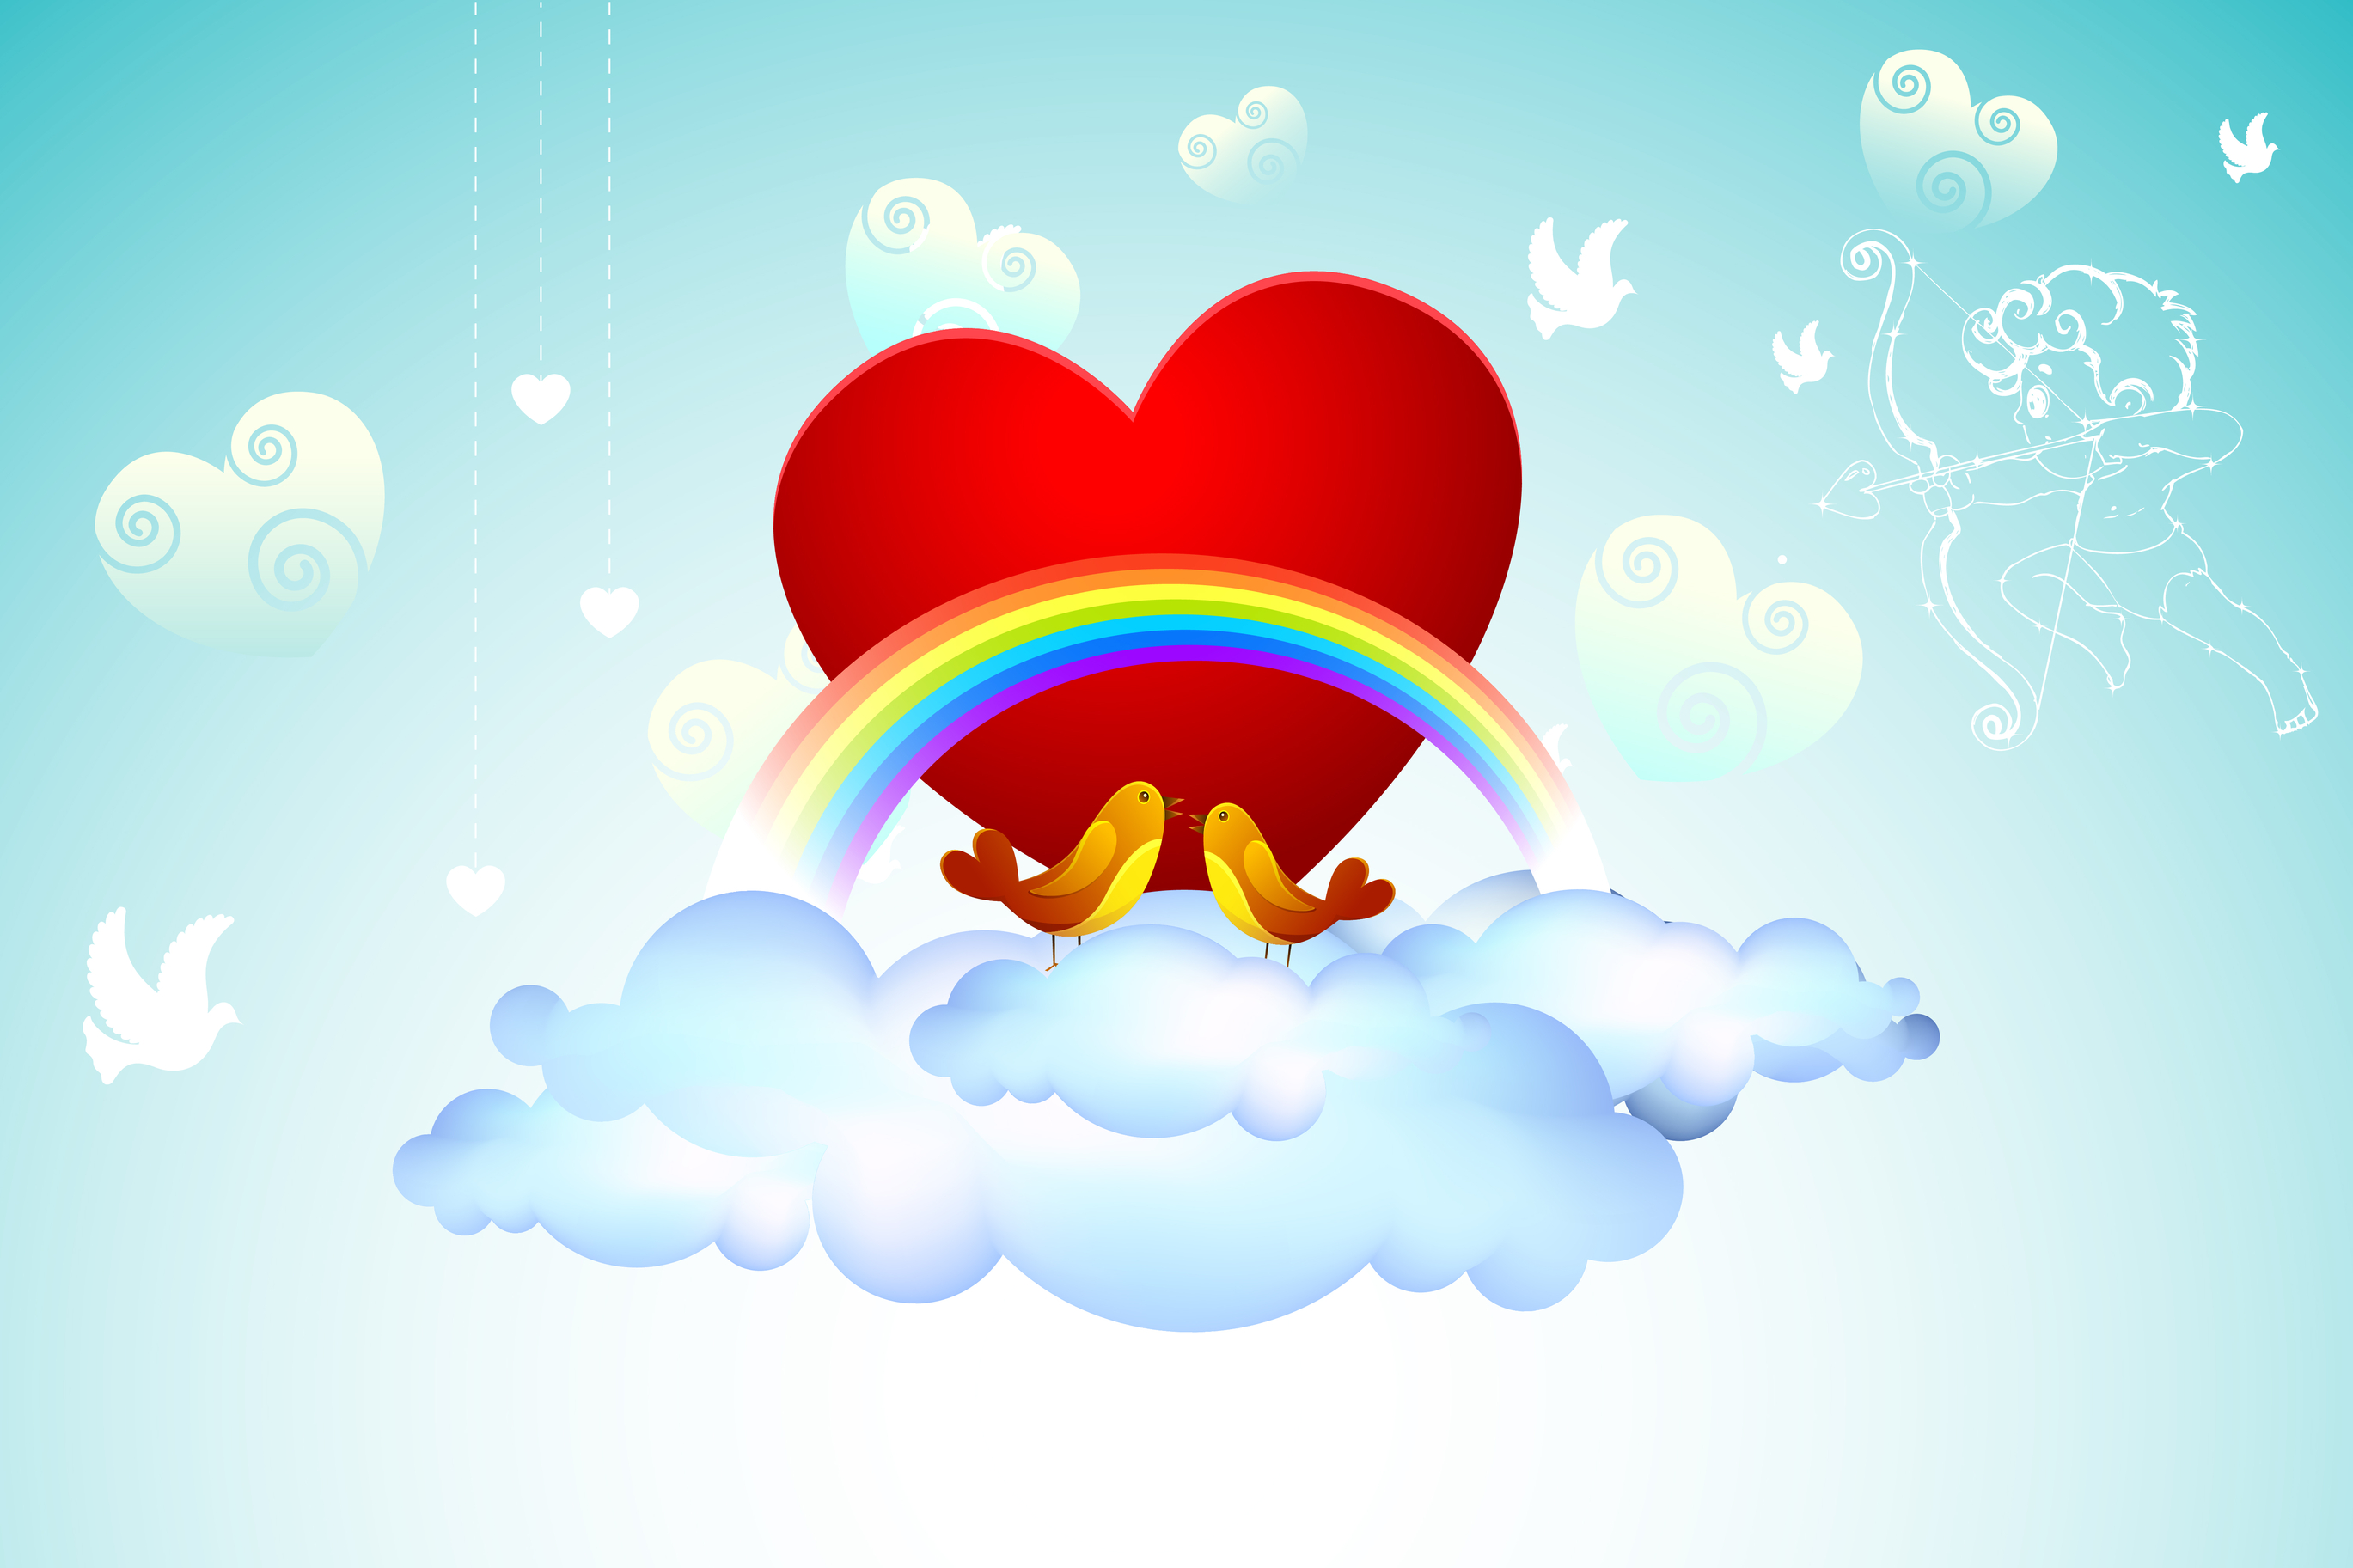 Have You Decided Which Cloud Will Be Your Valentine?